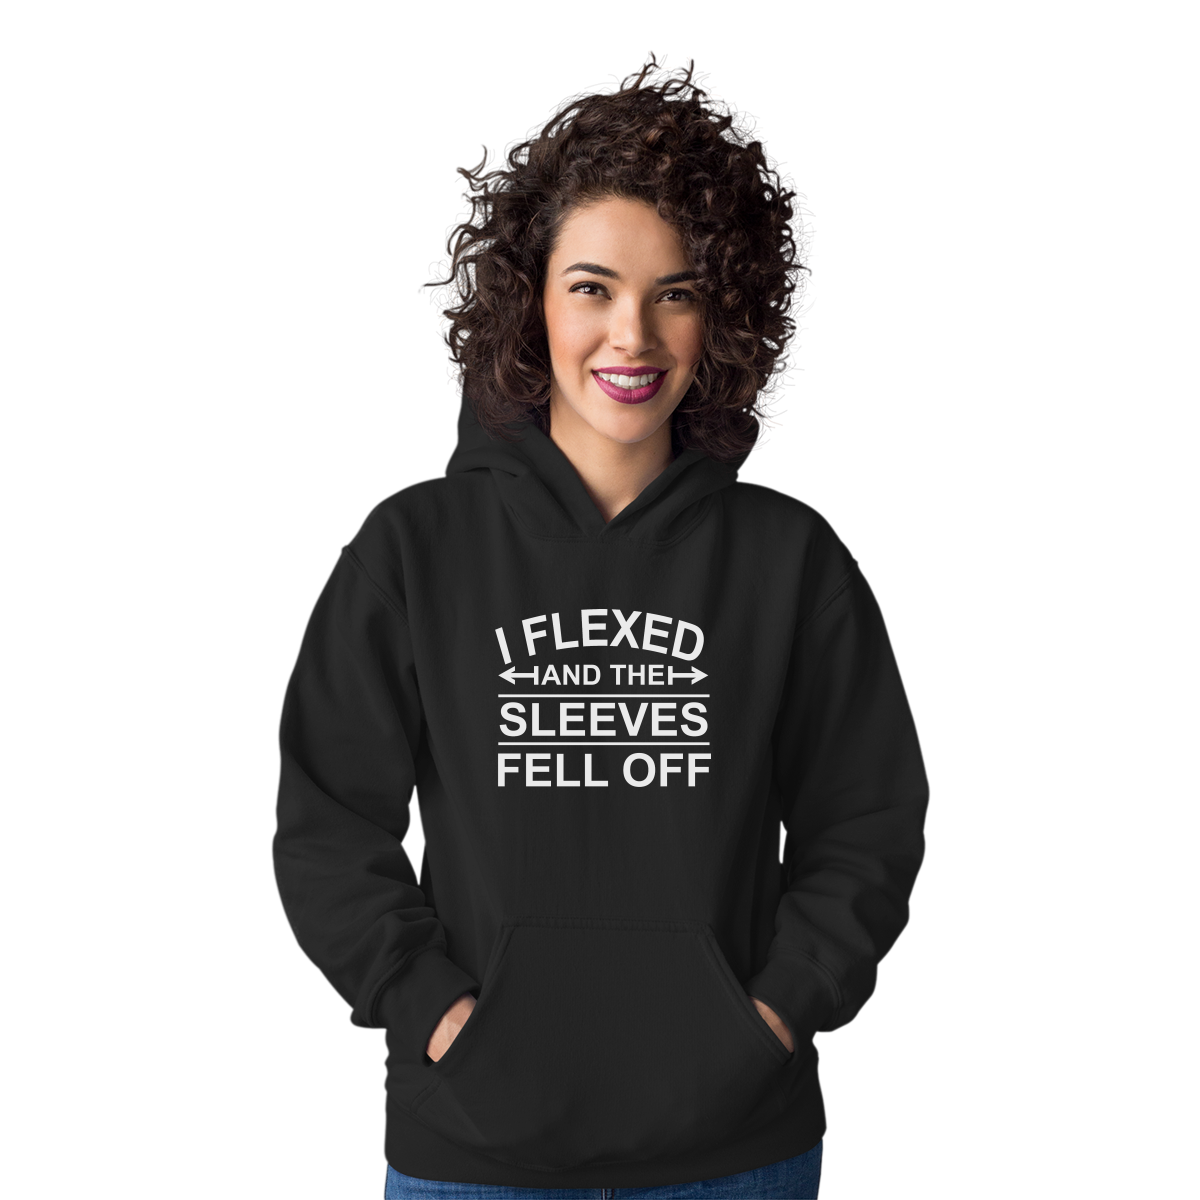 I Flexed and the sleeves fell off Unisex Hoodie | Black